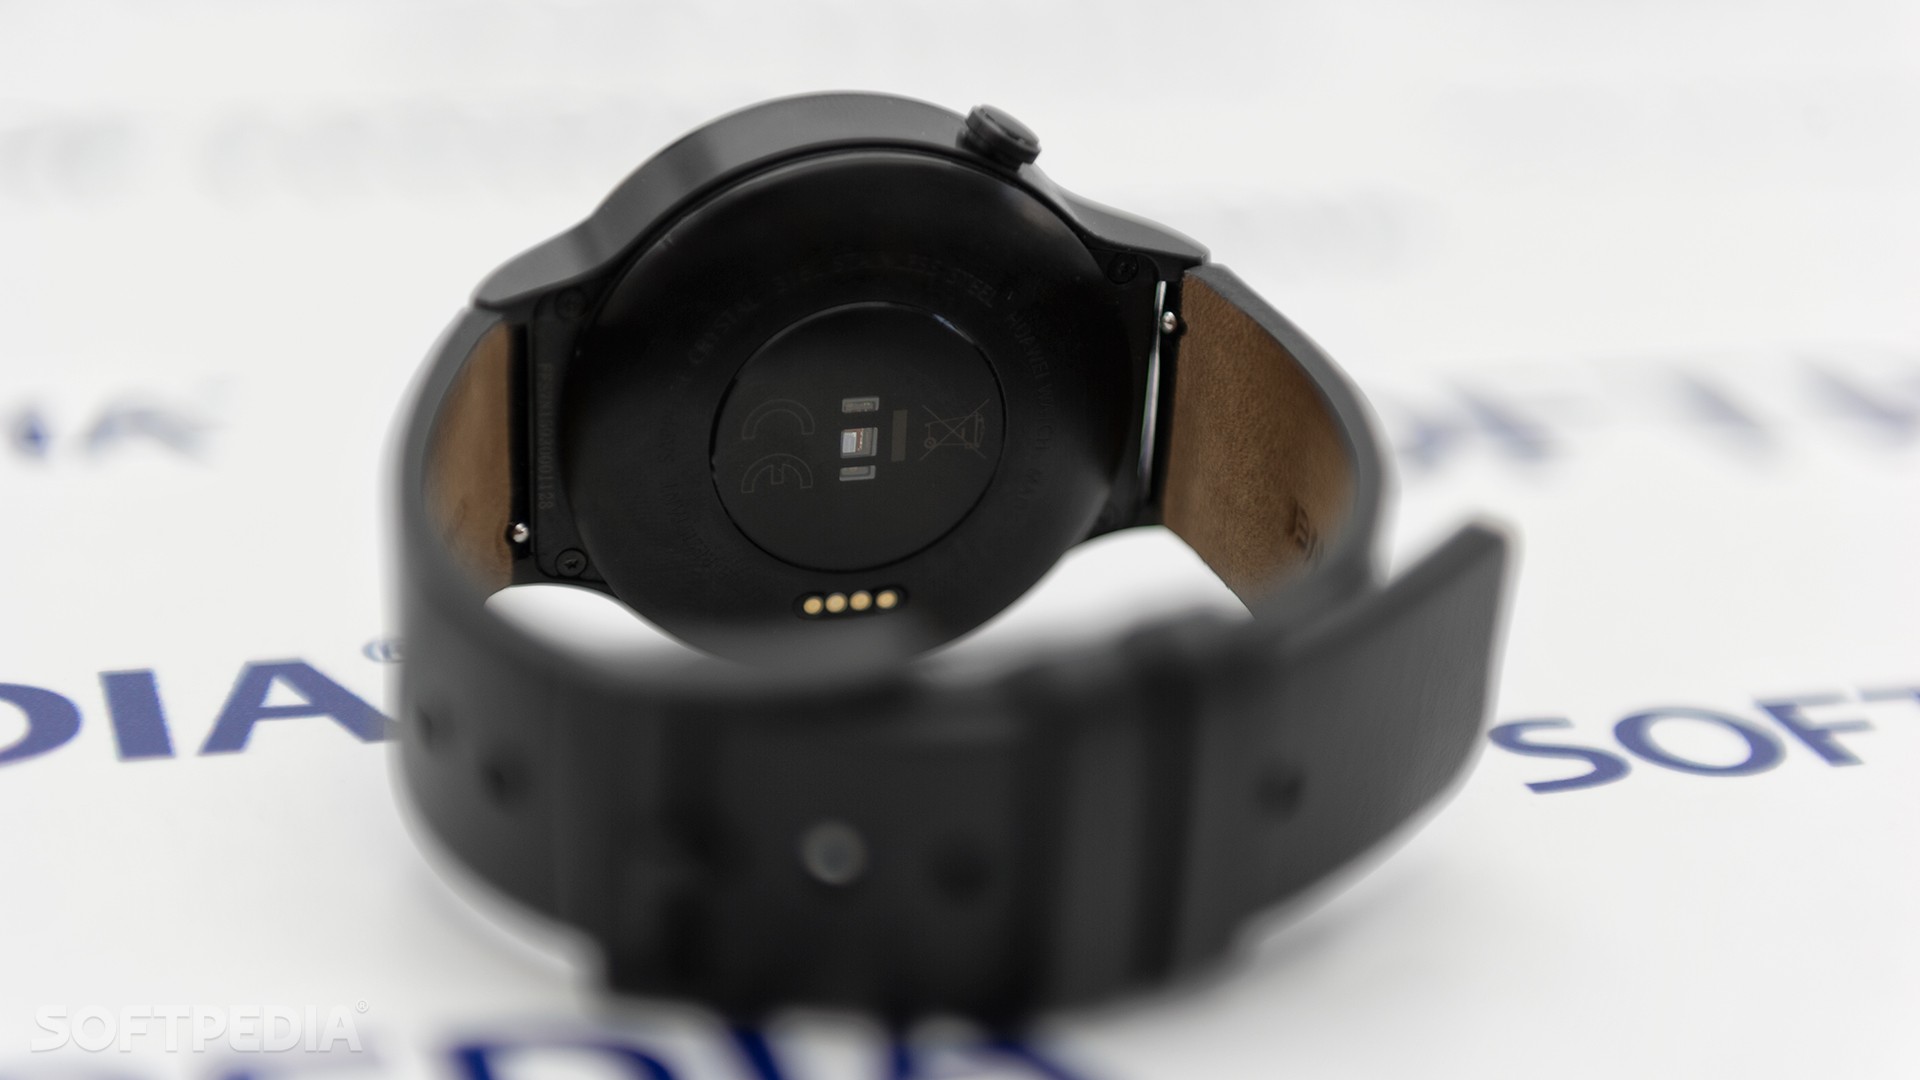 Huawei Watch Review - A Touch of Class